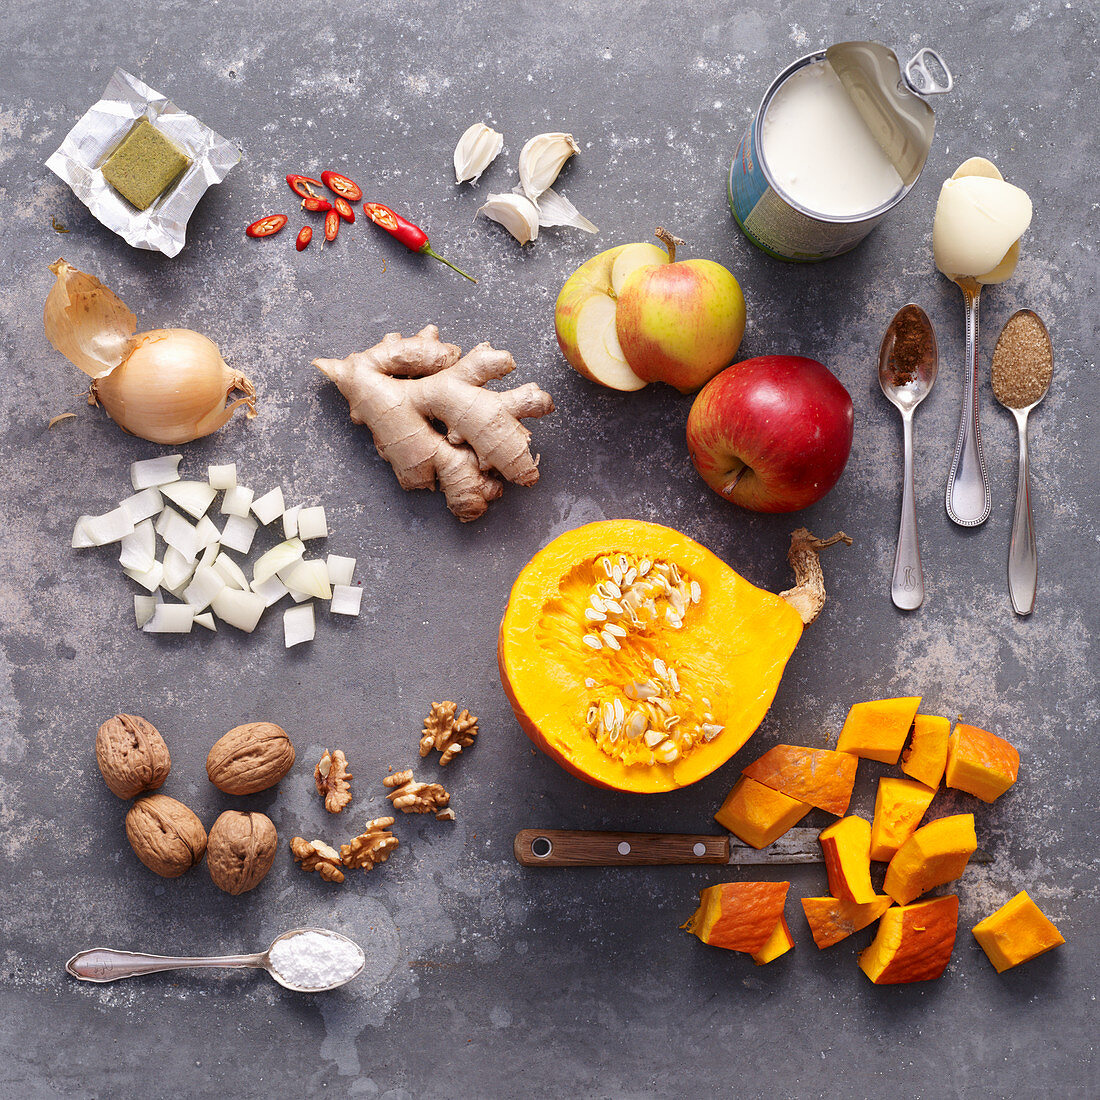 Ingredients for pumpkin soup with ginger and apple